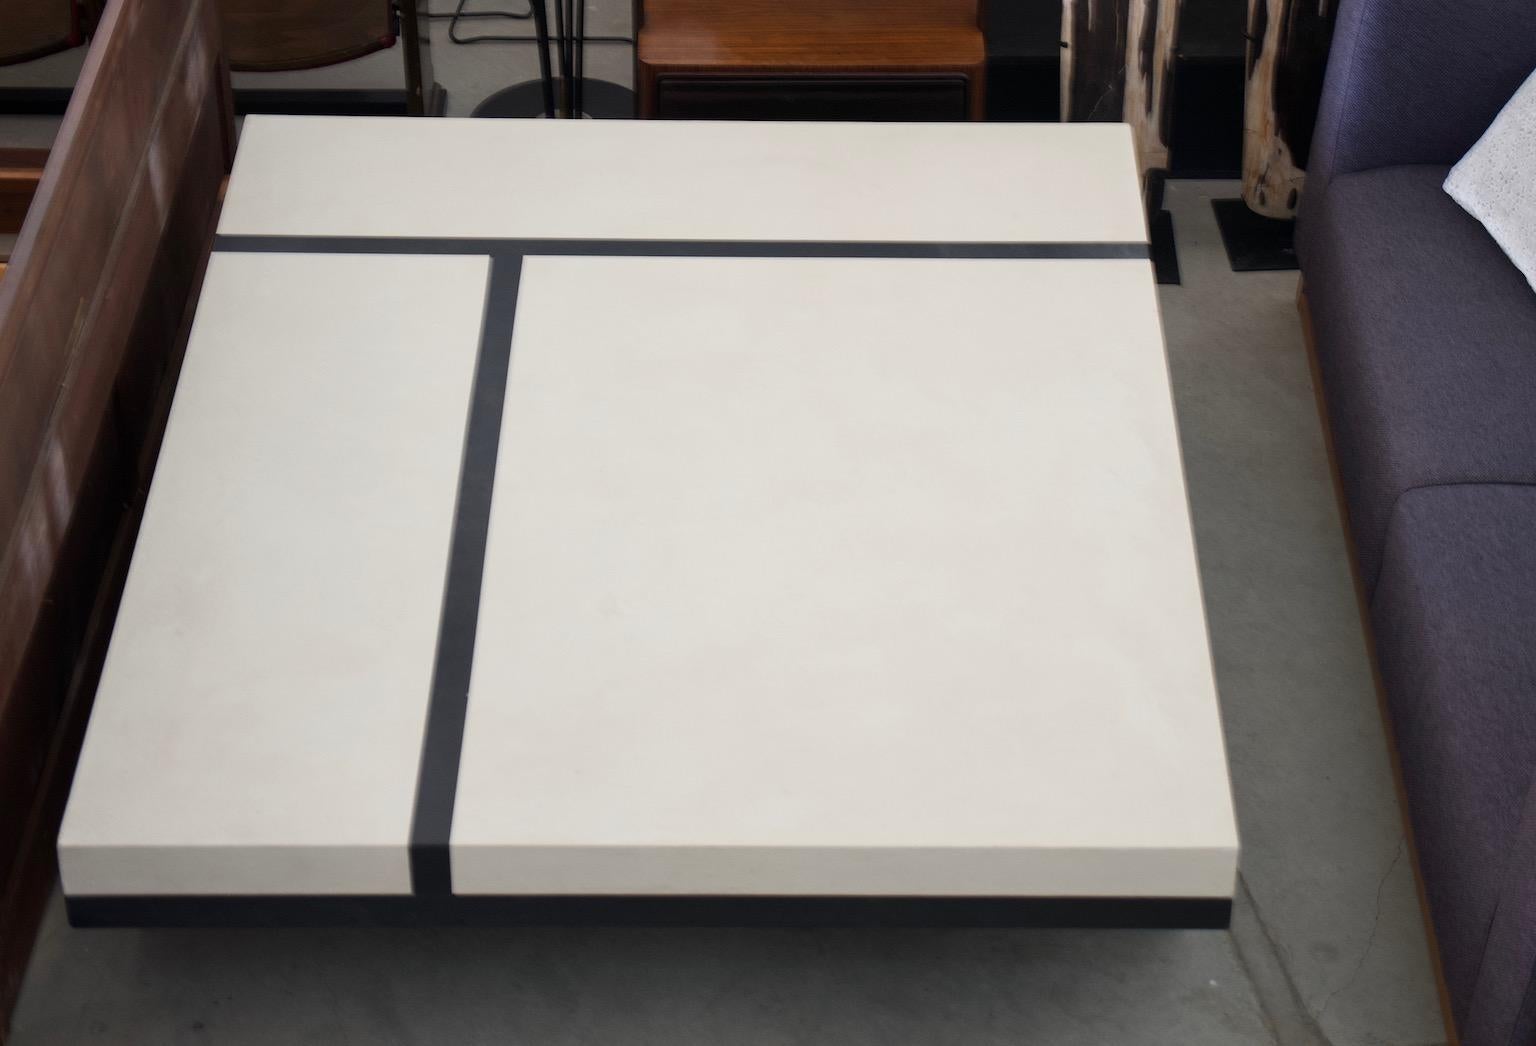 Coffee table by the Pierre Bonnefille workshops, rectangular top wrapped with tulle and painted over. Black lines crossing on a white background. Black feet.
Please note that the table is very heavy.

About the designer: Pierre Bonnefille is a